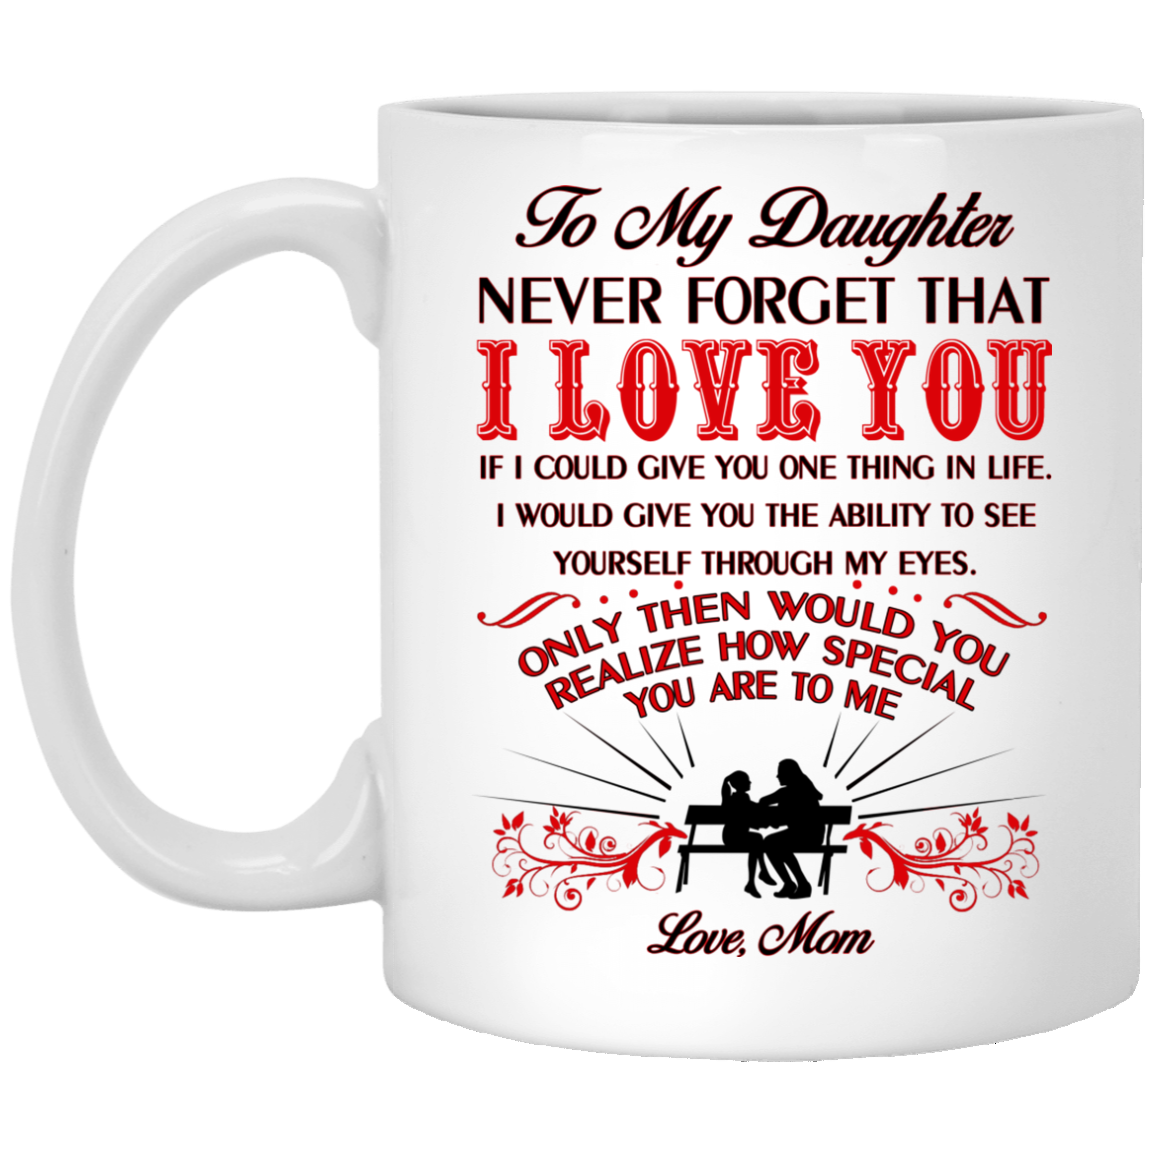 To My Daughter Love Mom Mug - Never forget that I love you